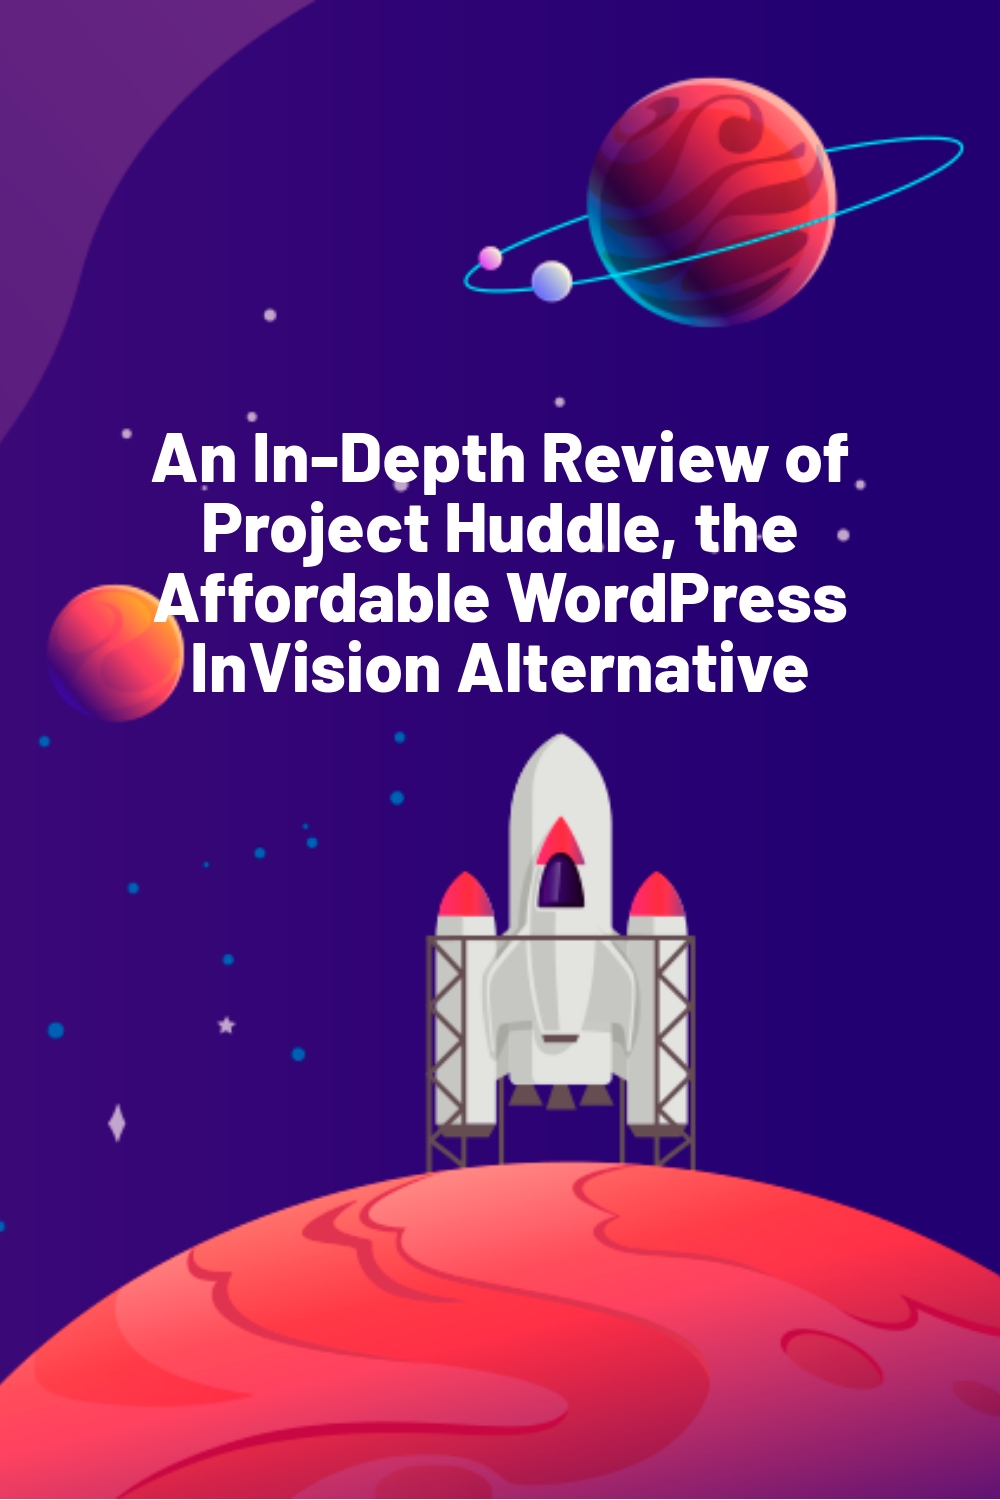 An In-Depth Review of Project Huddle, the Affordable WordPress InVision Alternative